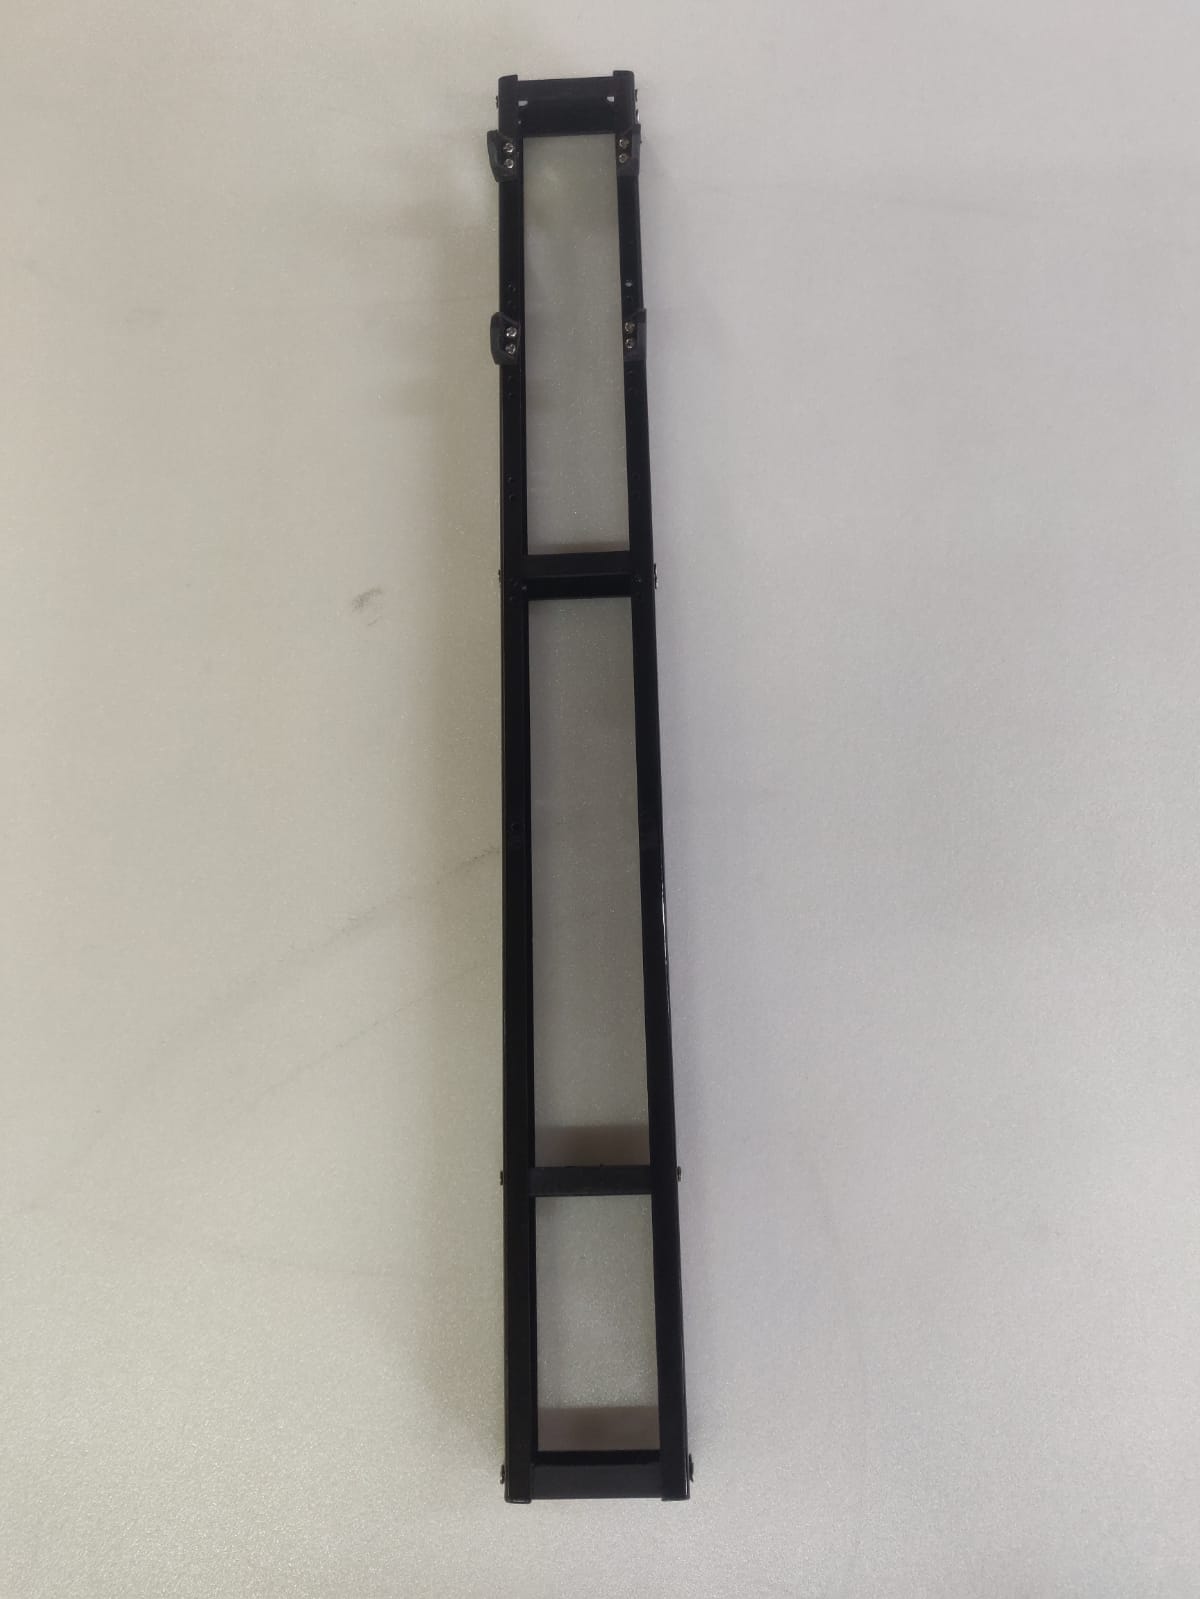 RC Truck chassis frame (Scale 1:18) BLACK Colour